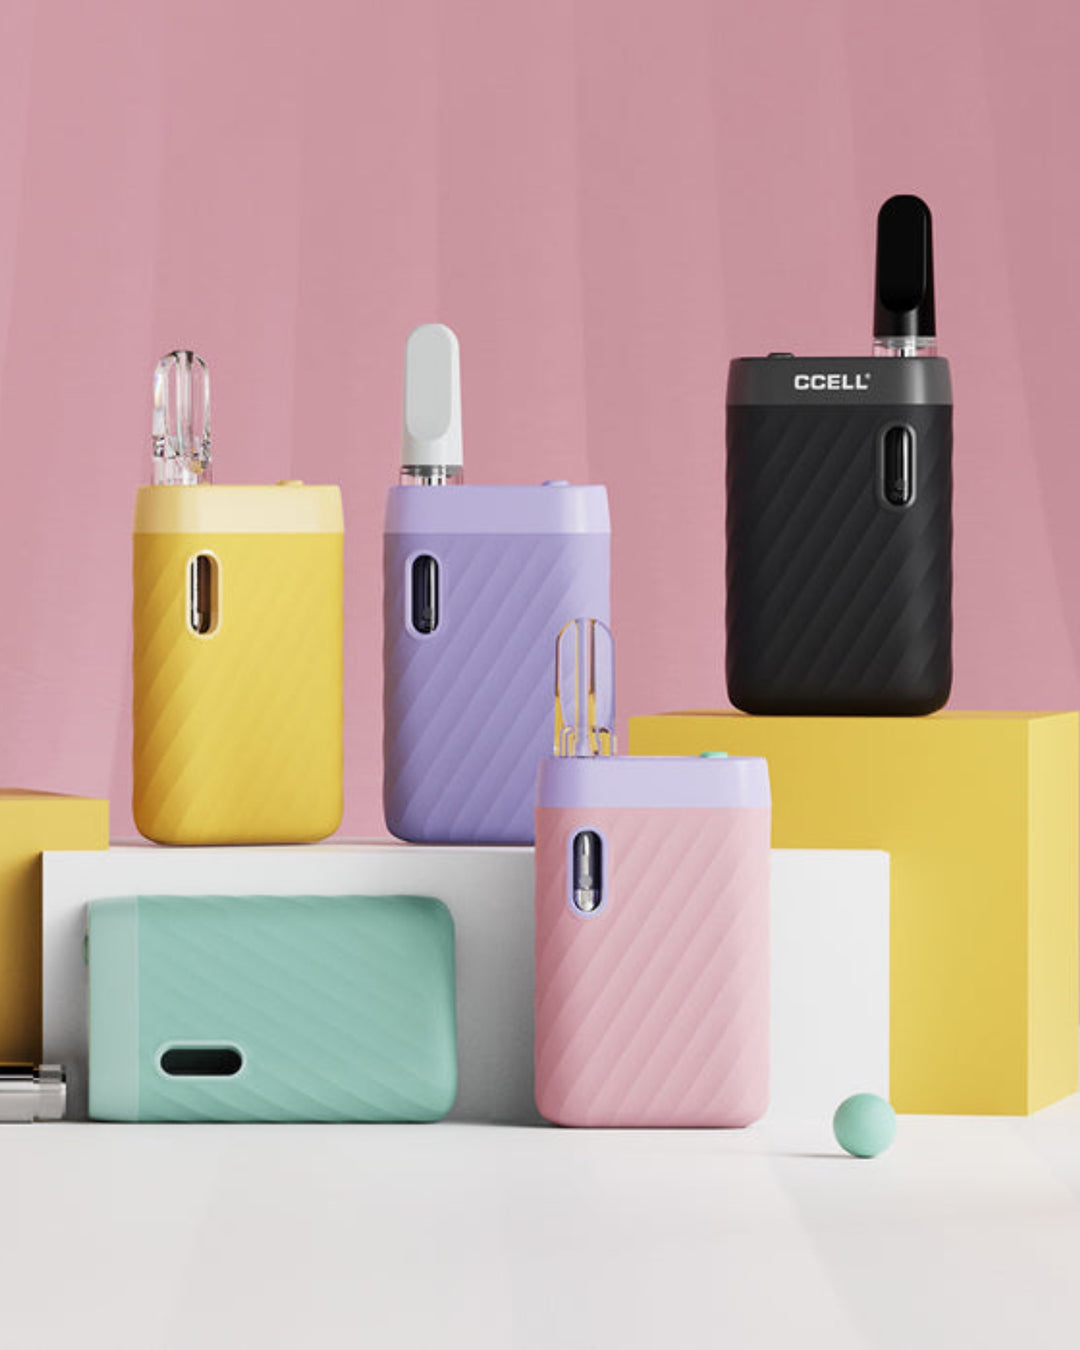 Ccell Sandwave battery vapes in black, yellow, lavender, and coral pink.